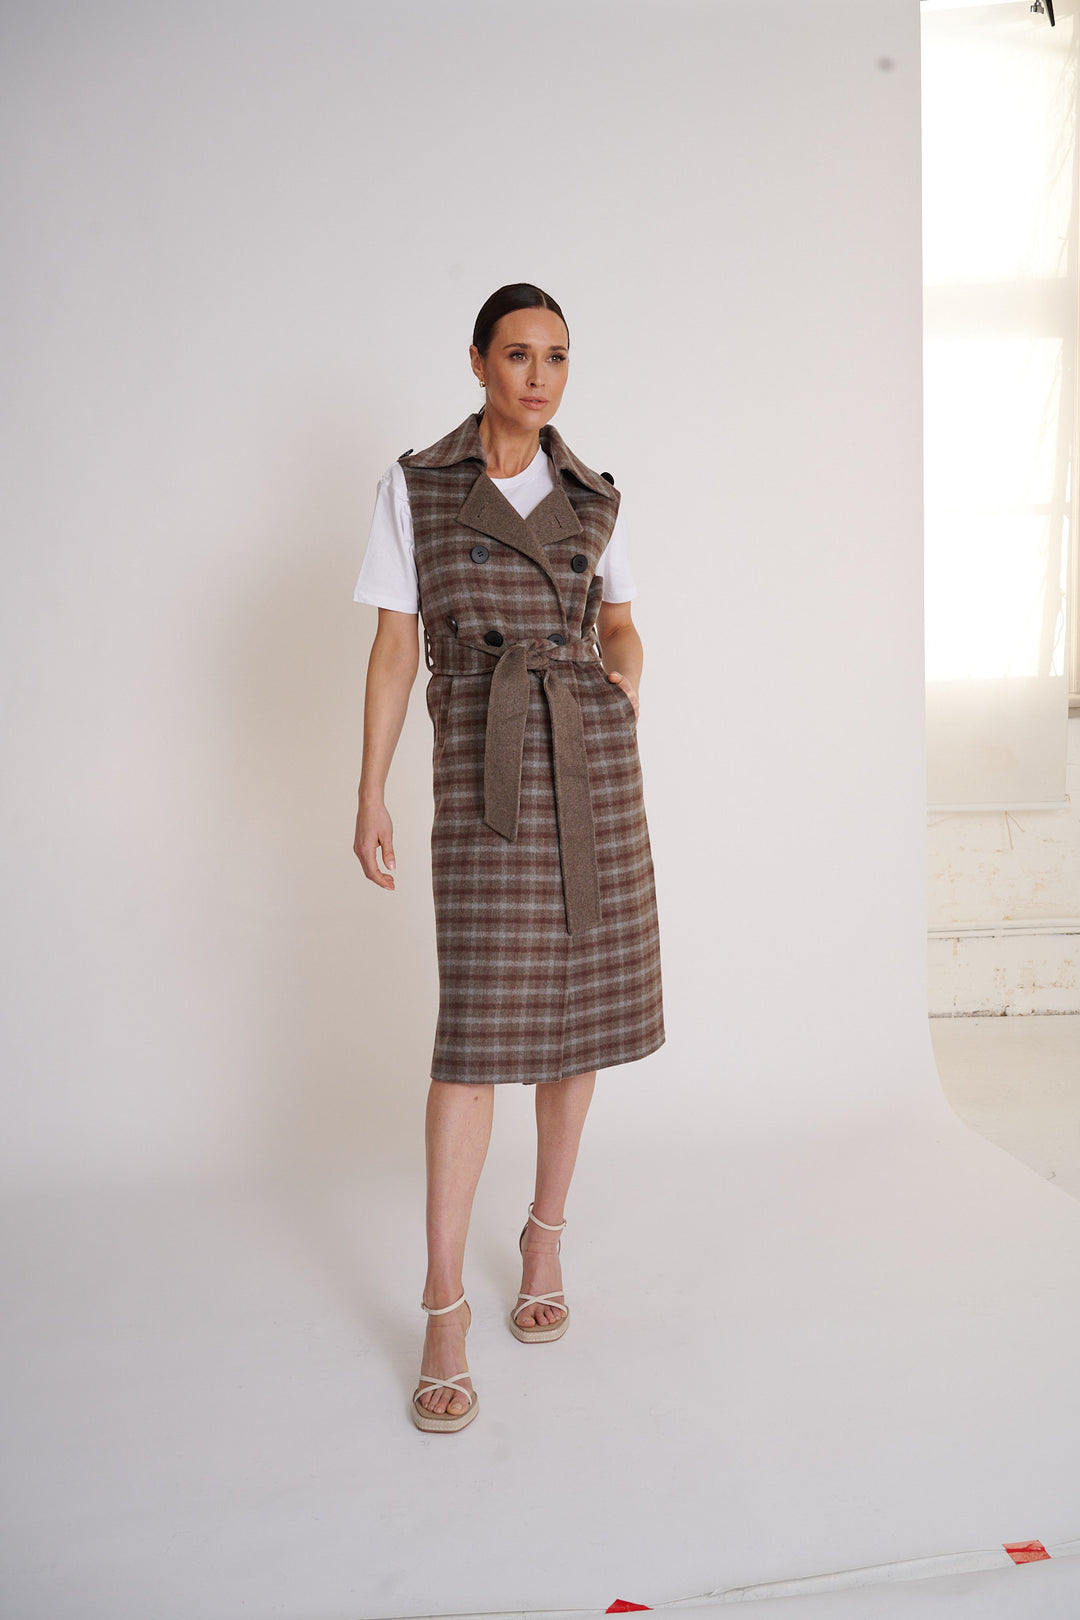 BIRDS OF A FEATHER | JOSIE COAT | FAWN PLAID